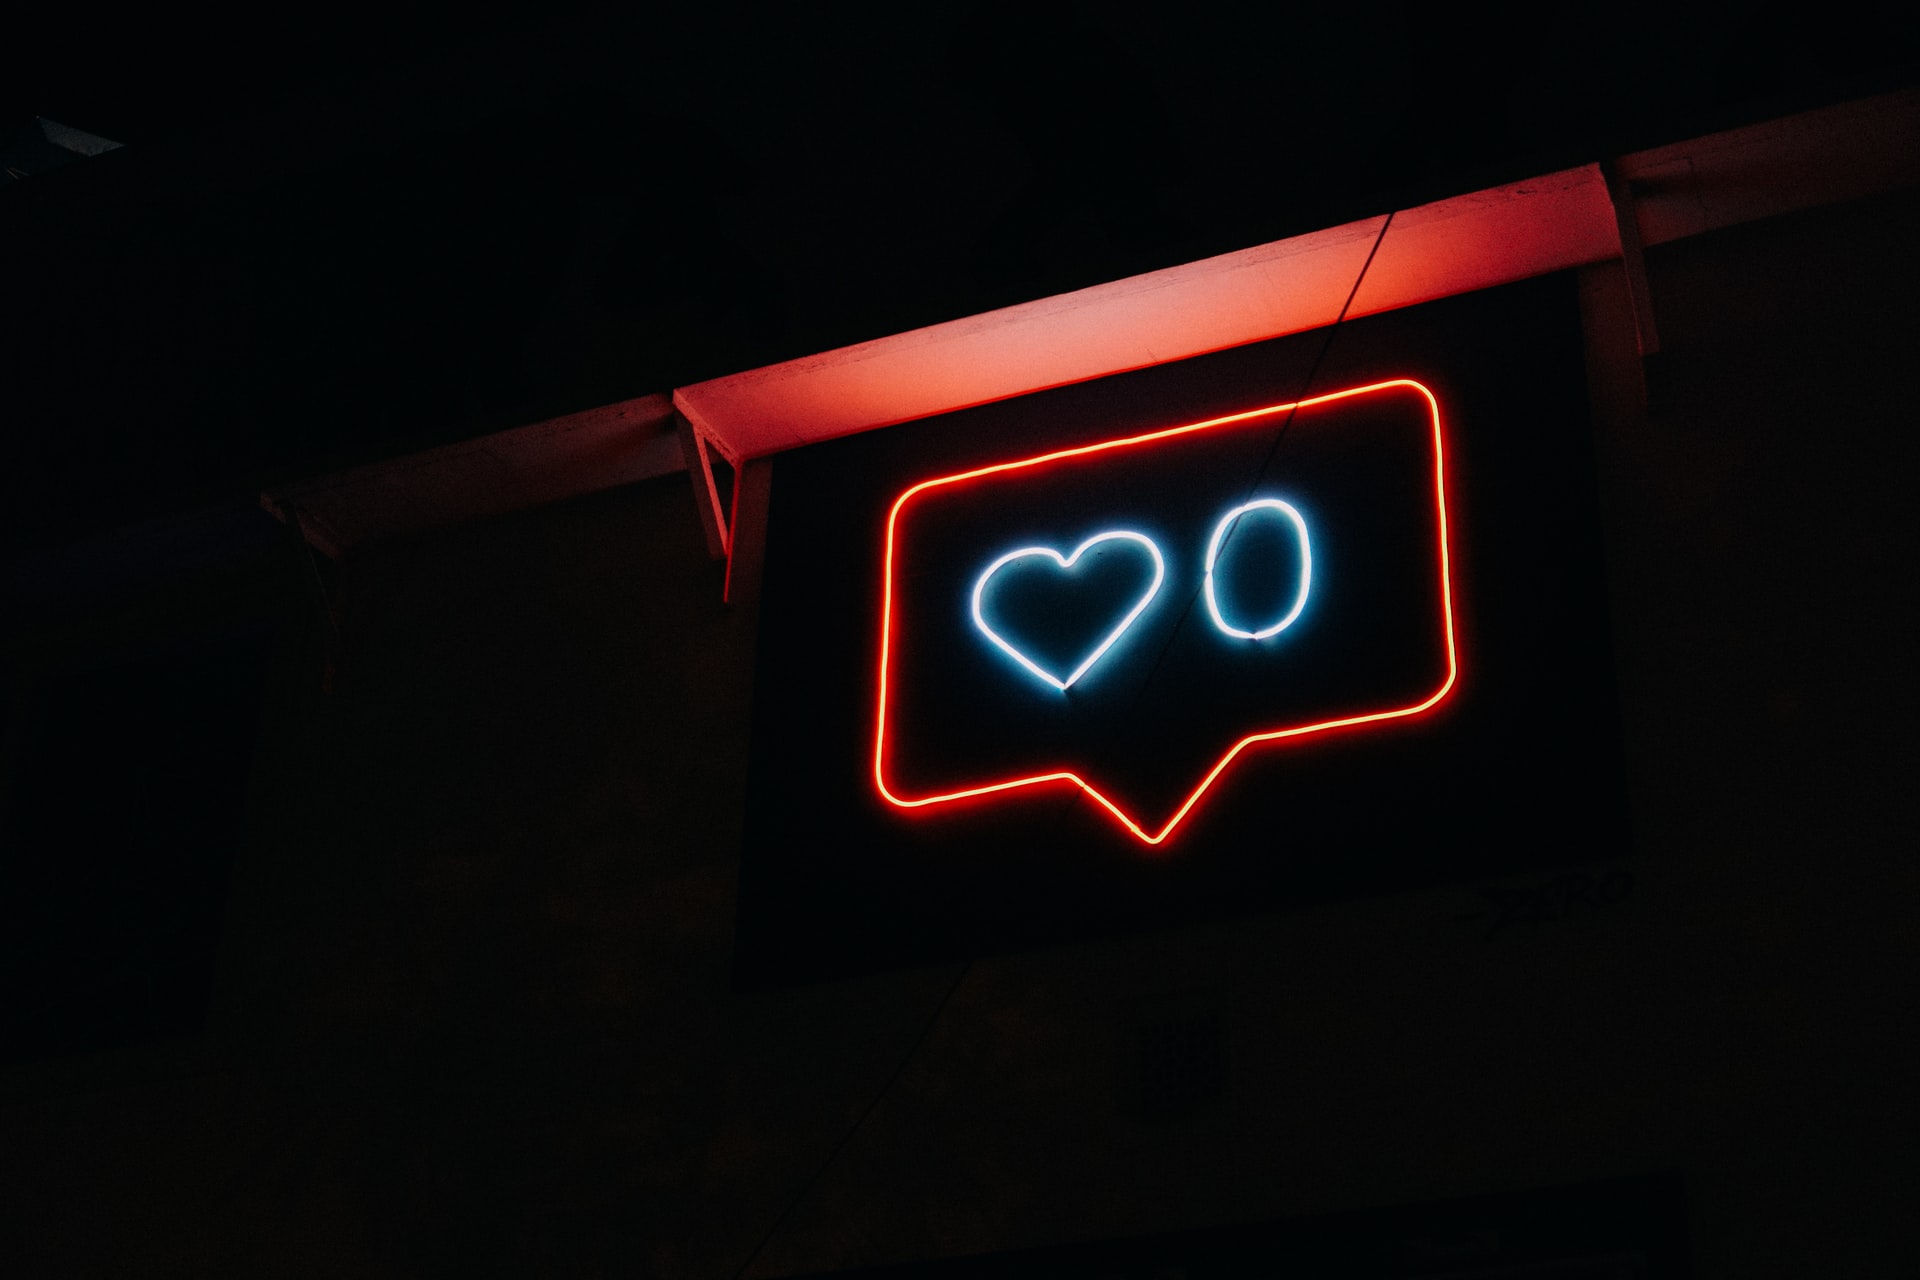 A neon sign in the shape of a speech bubble with a heart and the number 0 inside of it.